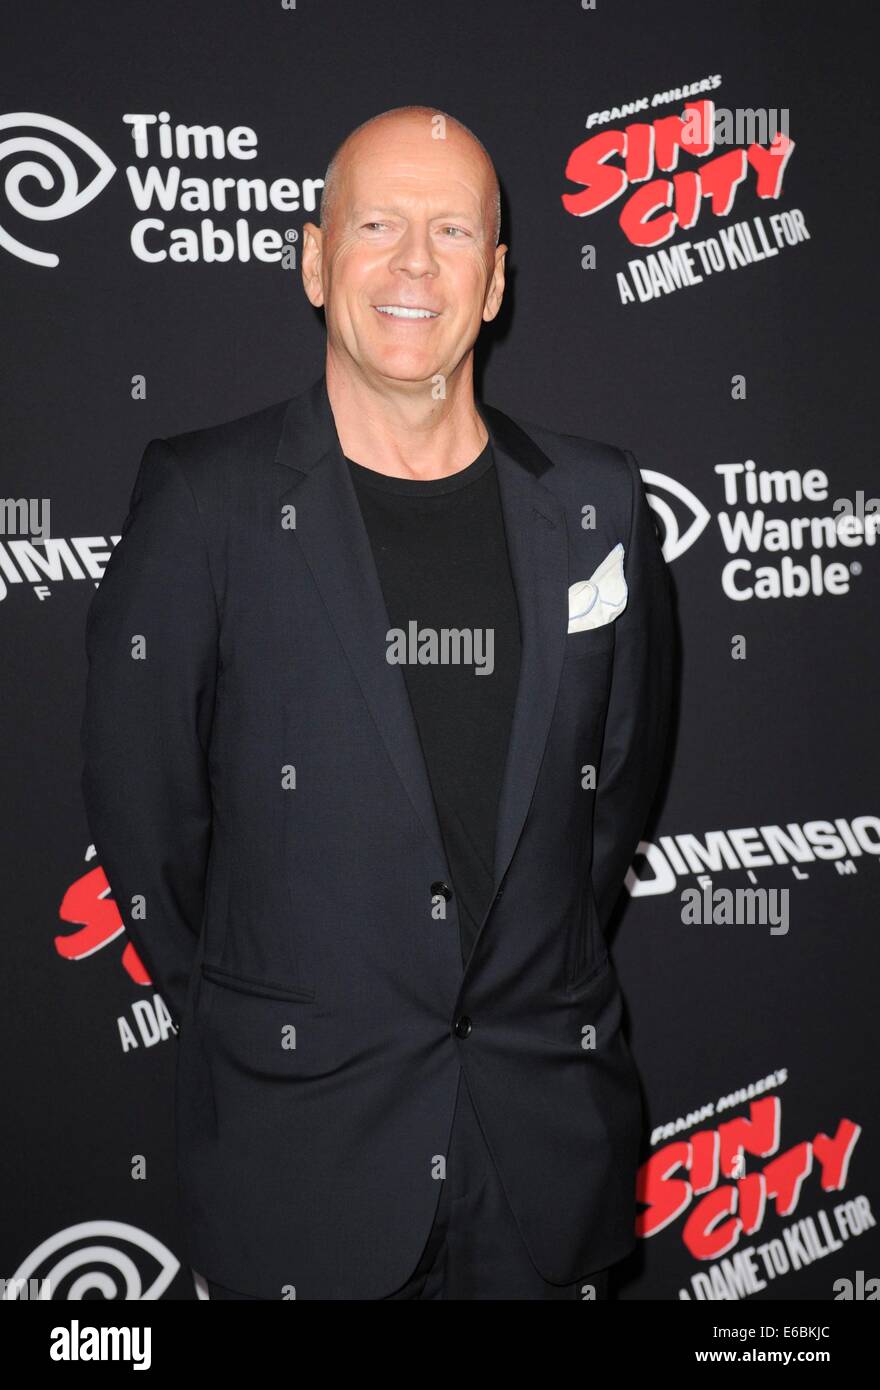 Los Angeles, CA, USA. 19th Aug, 2014. Bruce Willis at arrivals for SIN CITY: A DAME TO KILL FOR Premiere, TCL Chinese 6 Theatres (formerly Grauman's), Los Angeles, CA August 19, 2014. Credit:  Elizabeth Goodenough/Everett Collection/Alamy Live News Stock Photo